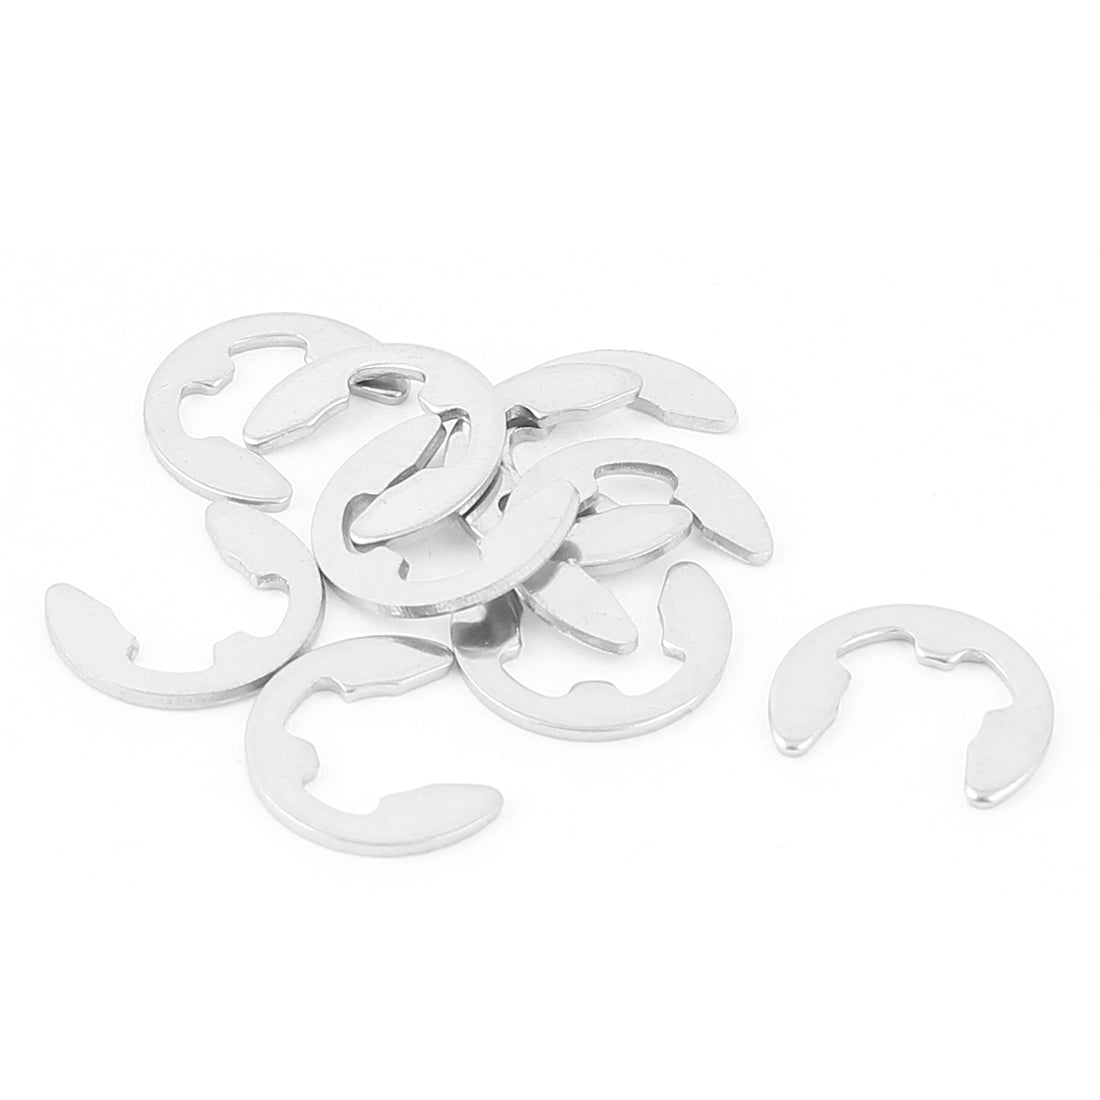 uxcell Uxcell 10pcs 304 Stainless Steel Fastener External Retaining Ring E-Clip Circlip 7mm